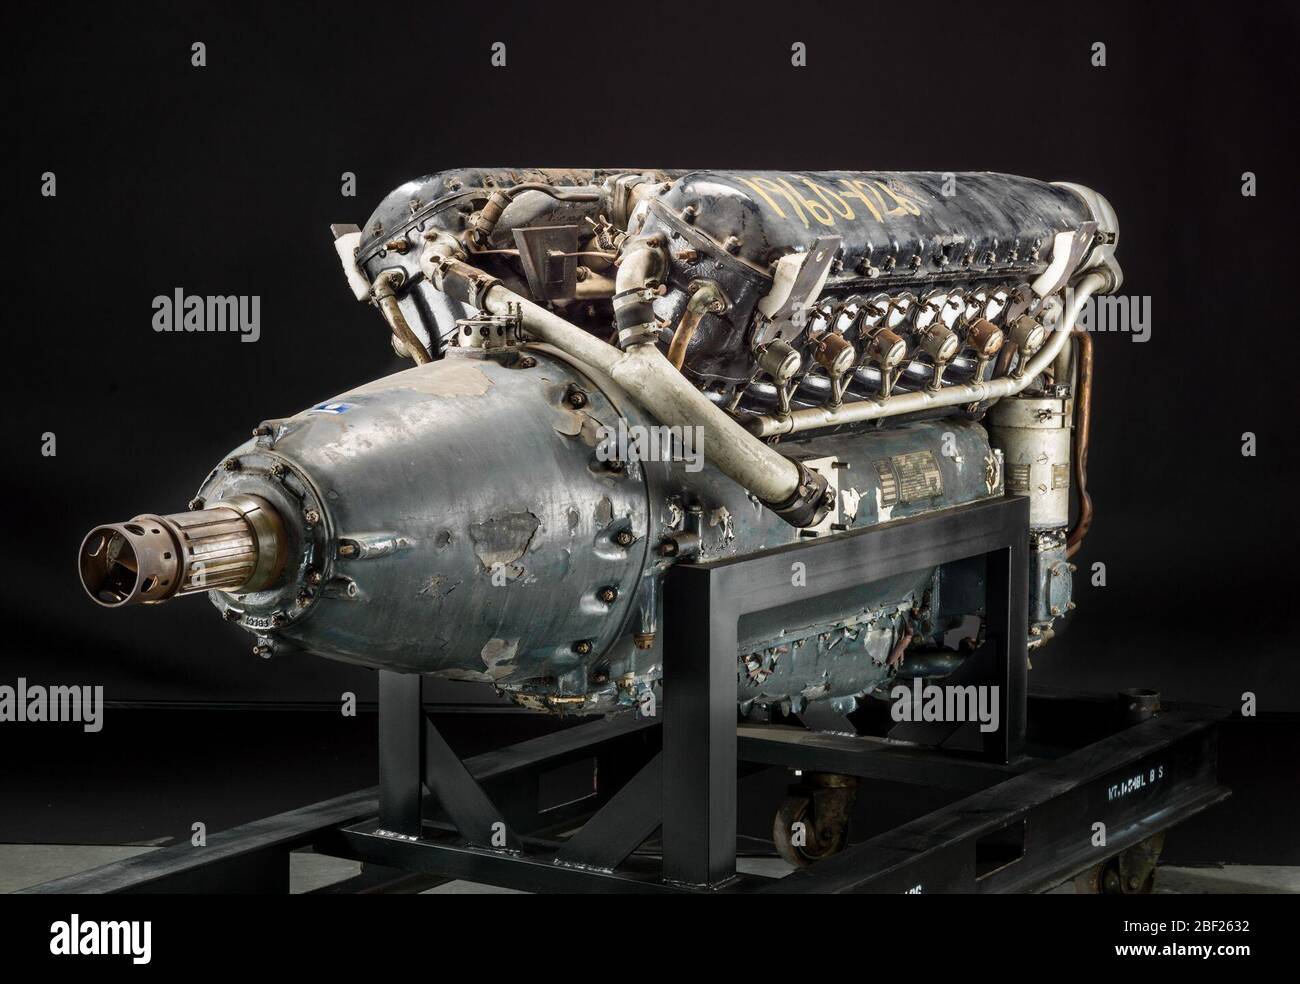 Allison XV17101 V12 Engine. Type: Reciprocating, V-type, 12 cylinders, ethylene- glycol cooledPower rating: 559 kW (750 hp) at 2,400 rpmDisplacement: 28 L (1,710 cu. Stock Photo